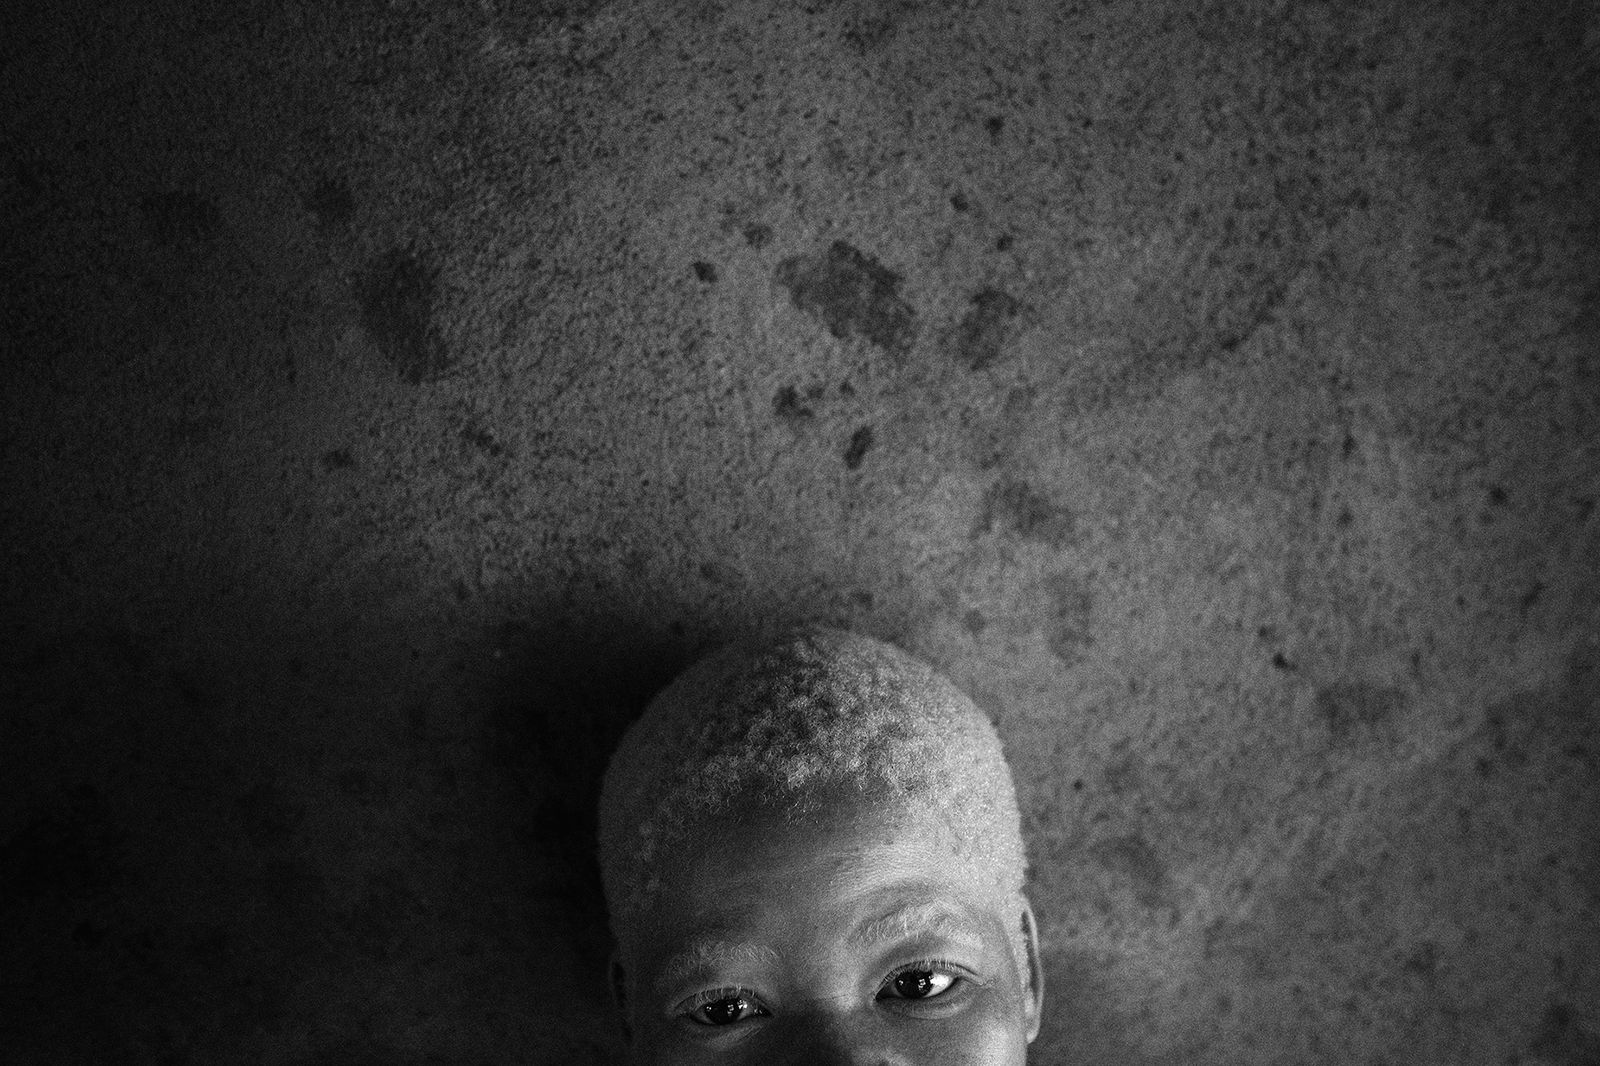 © Daniel Rodrigues - Image from the The hunted - albinos photography project